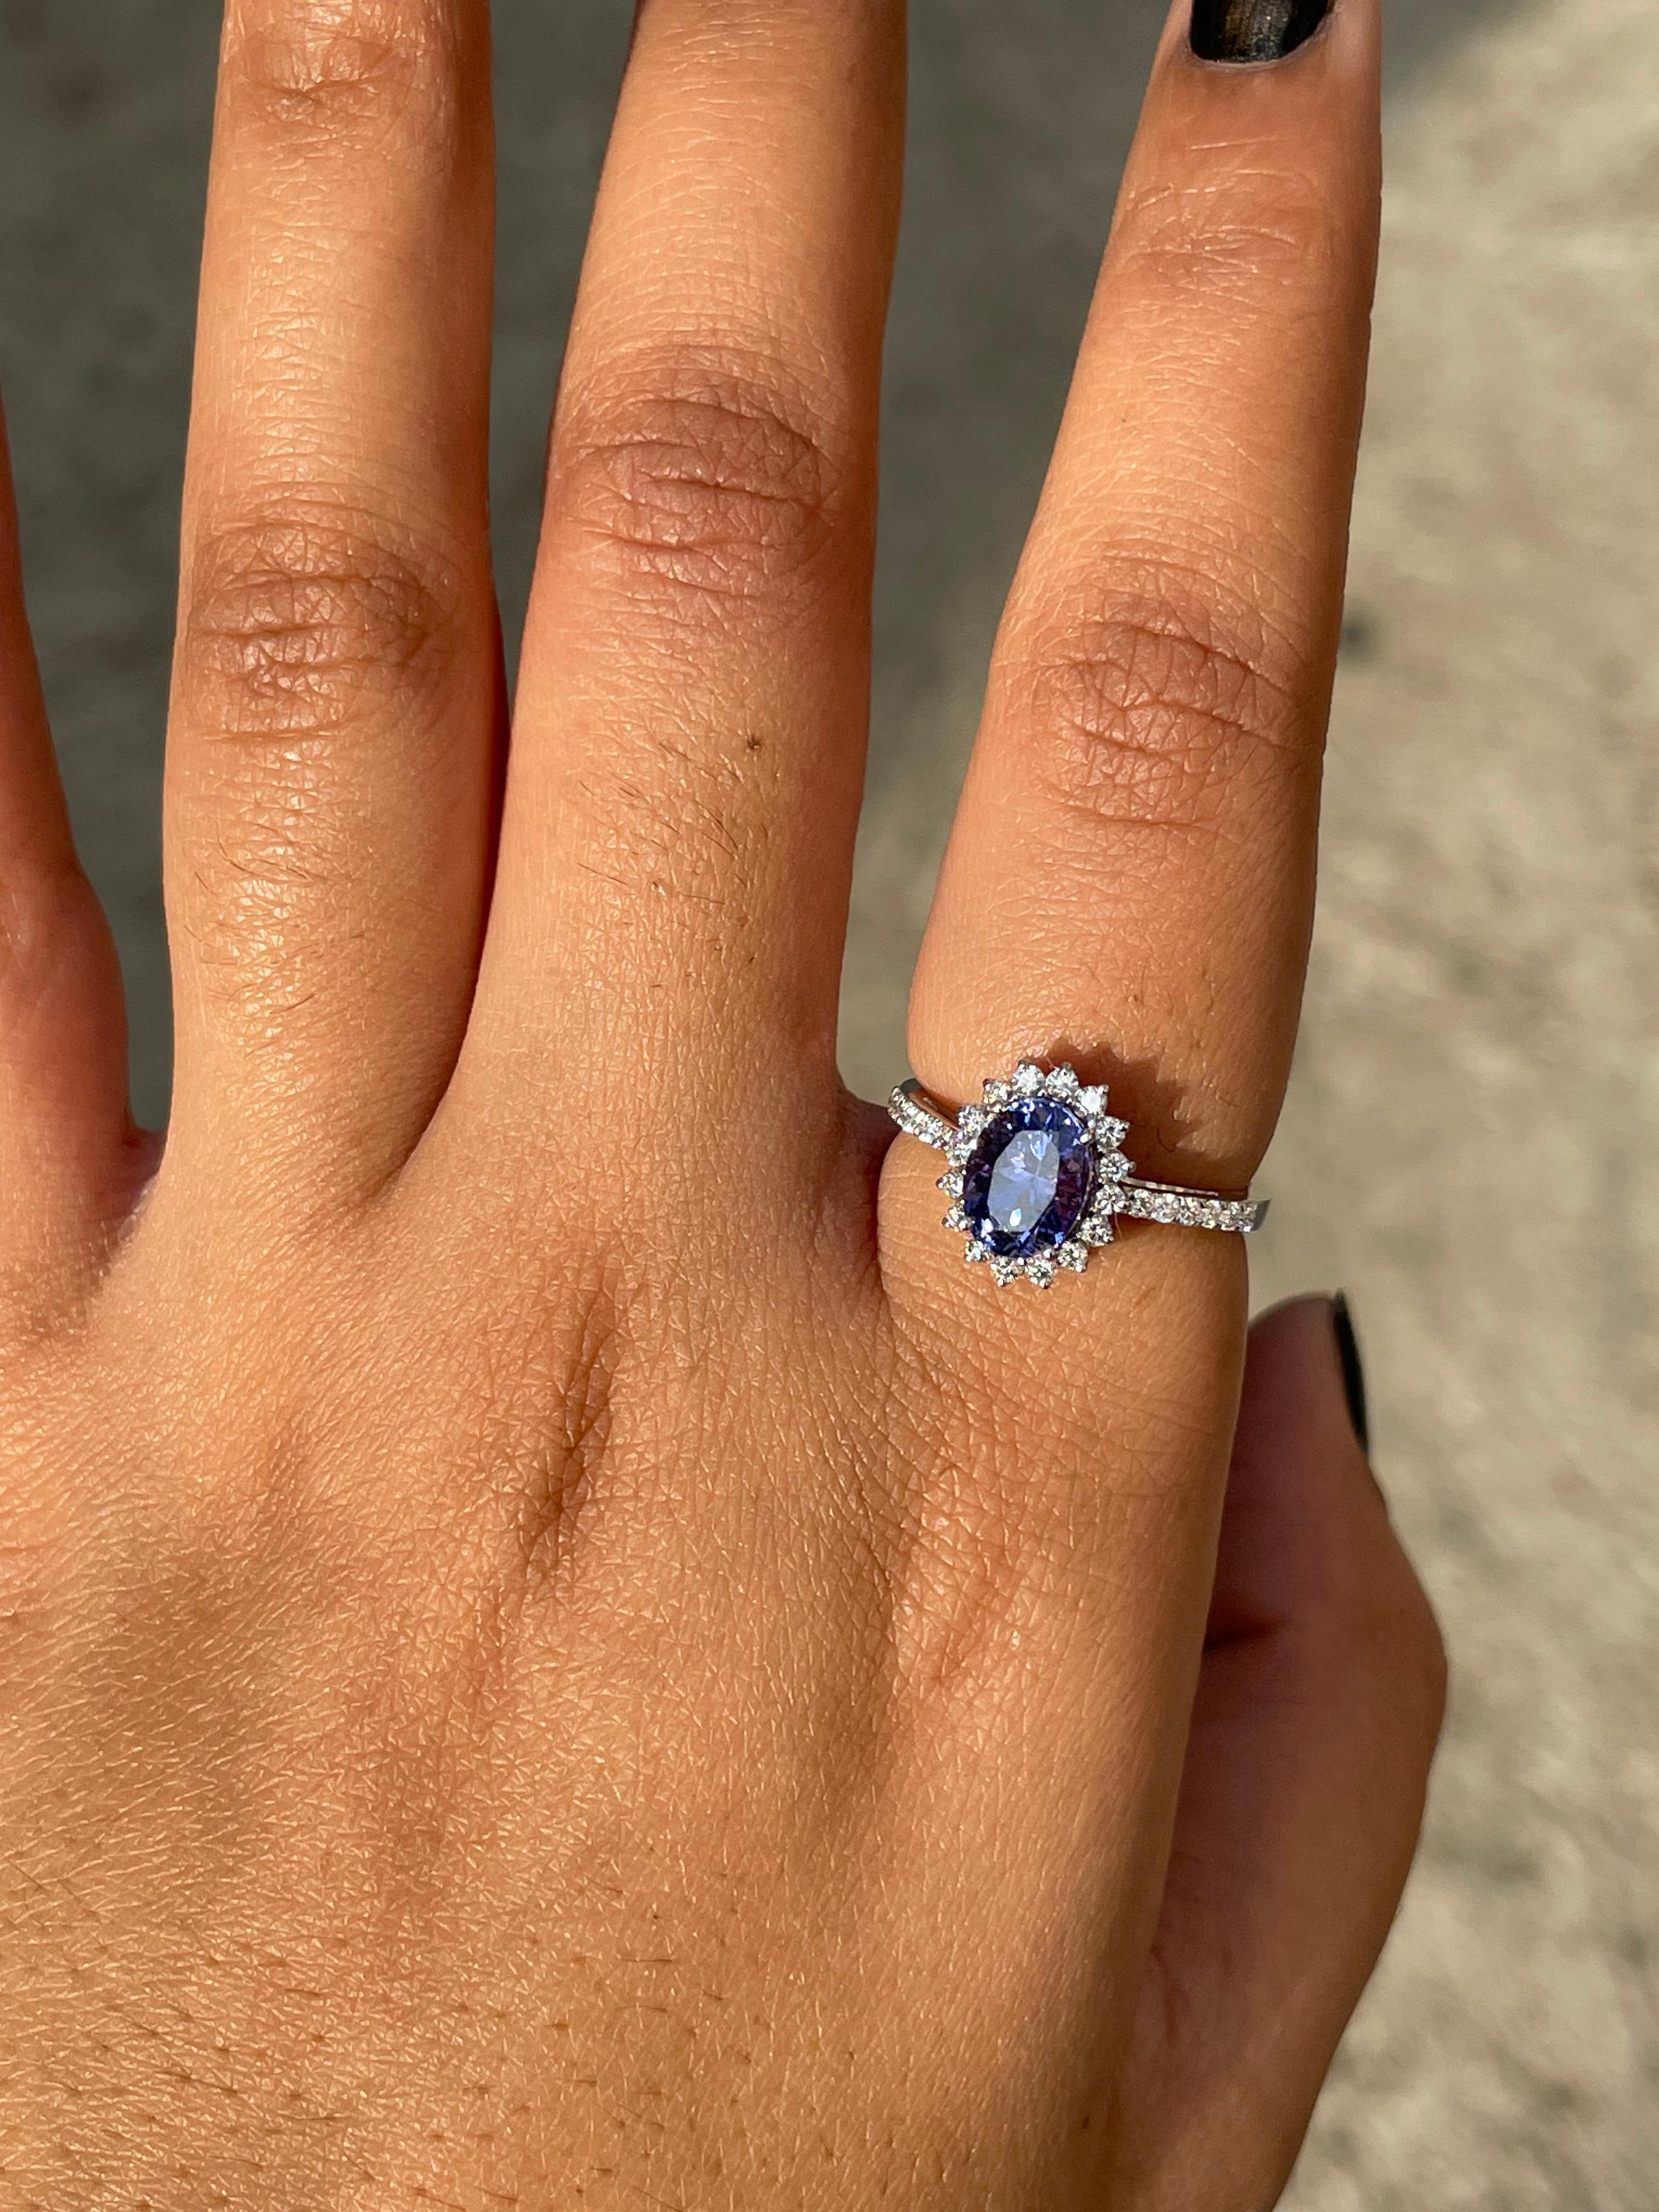 For Sale:  1.59 Carat Natural Tanzanite and Diamond Ring in 18k Solid White Gold 9